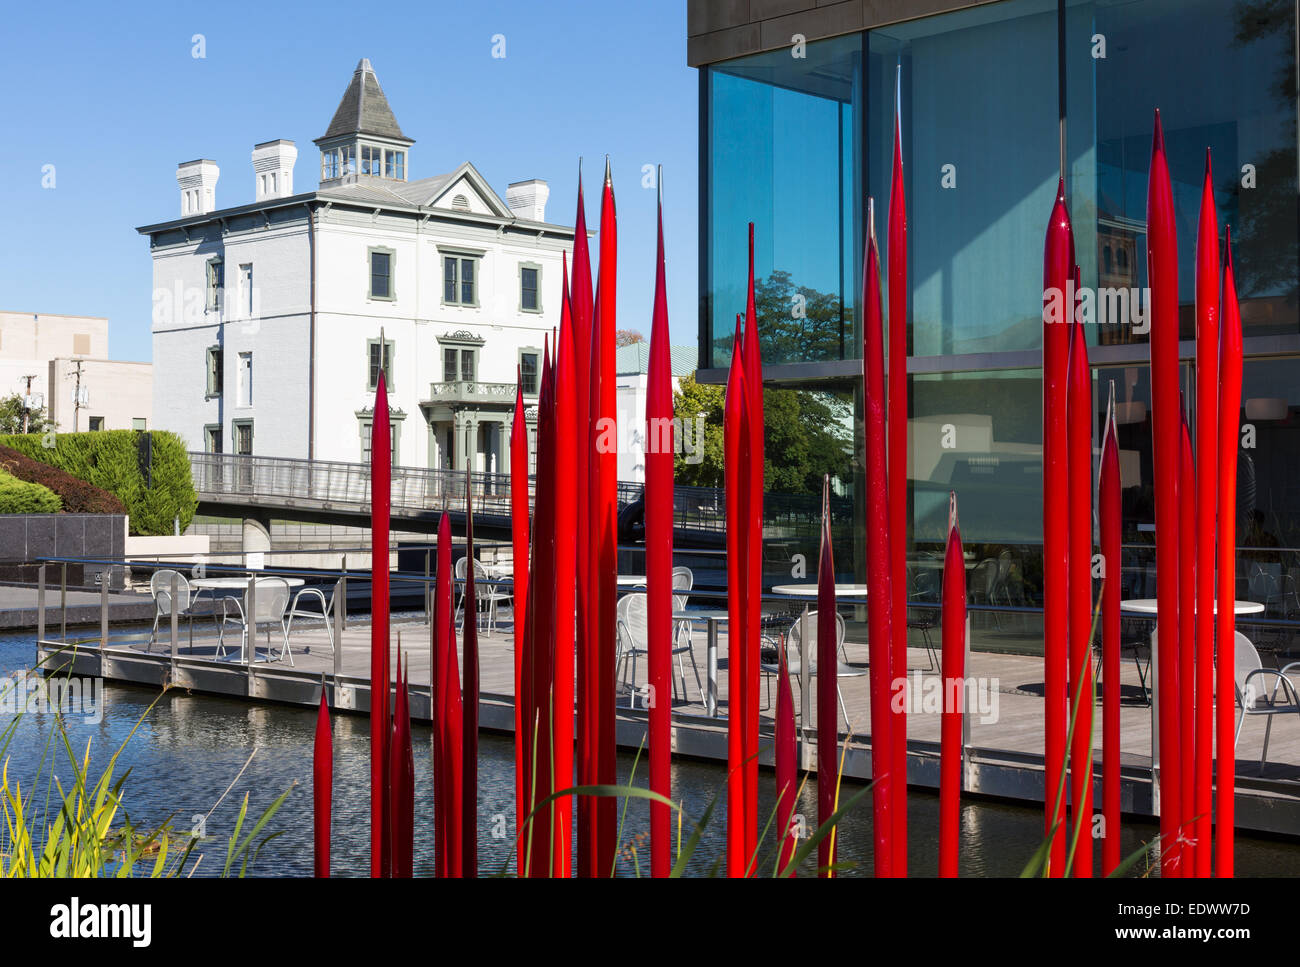 Dale Chihuly glass reed sculpture at the Virginia Museum of Fine Arts VMFA in Richmond, Virginia Stock Photo